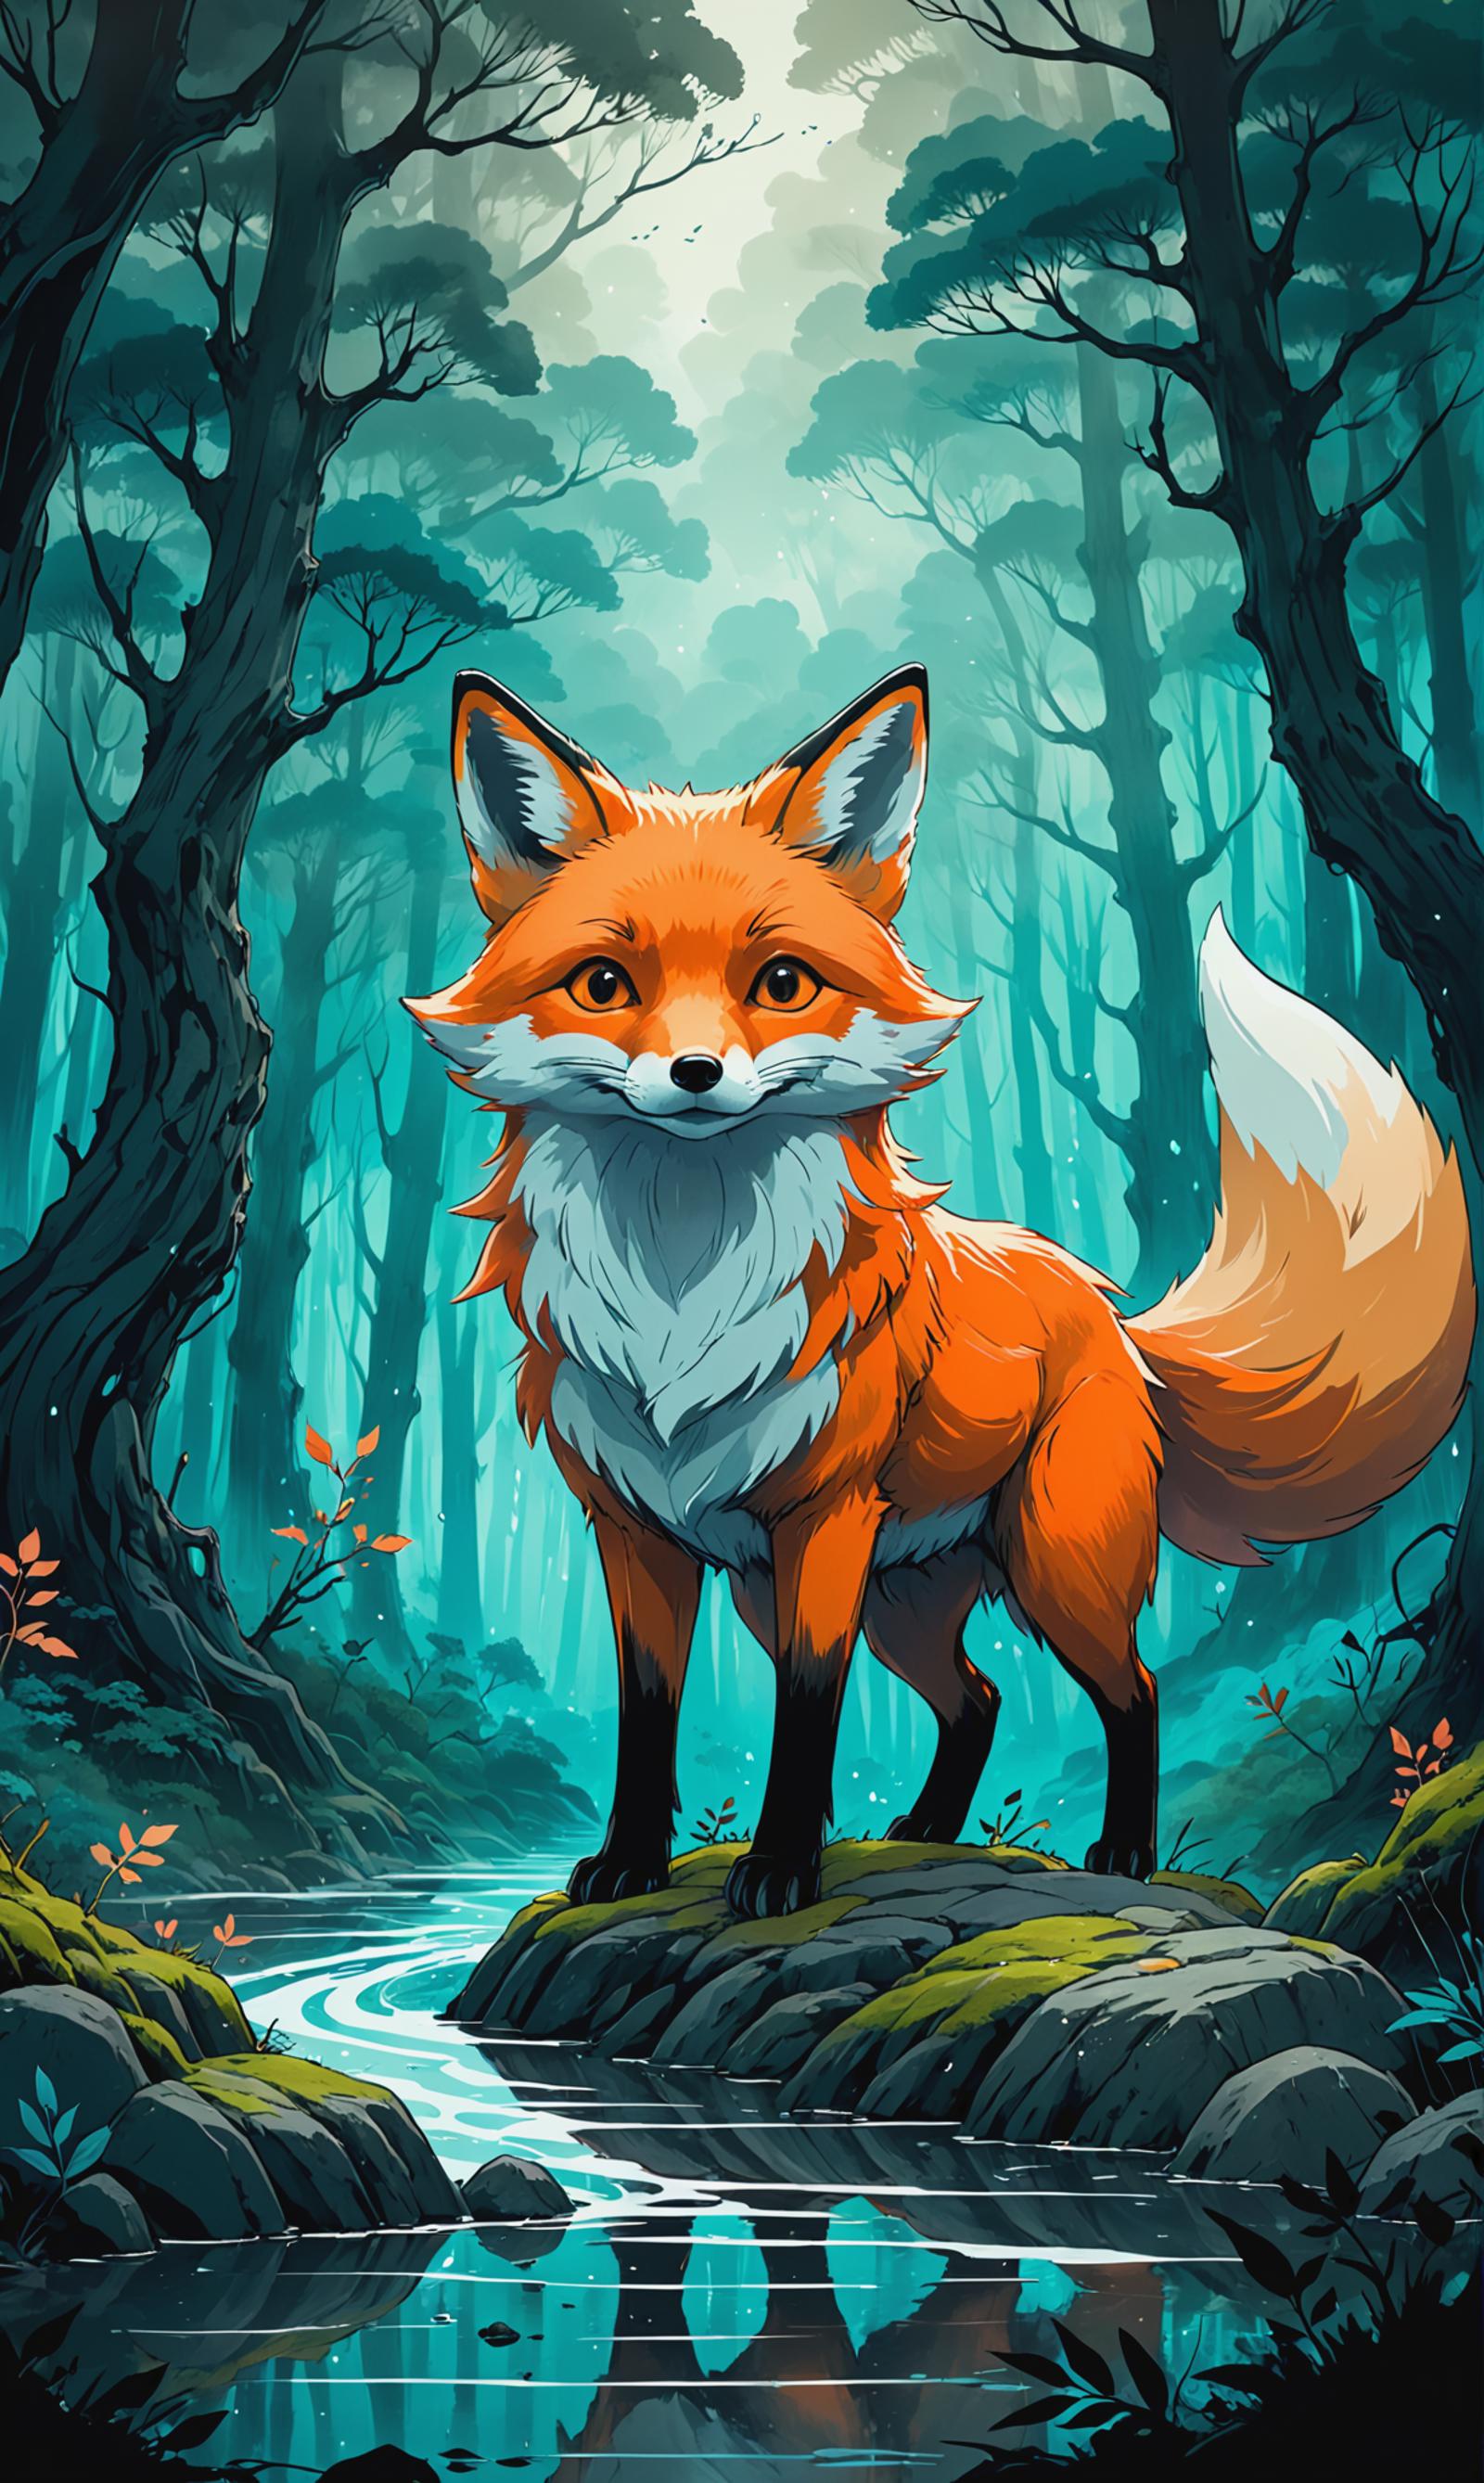 A cartoon fox standing in a forest with a blue background.